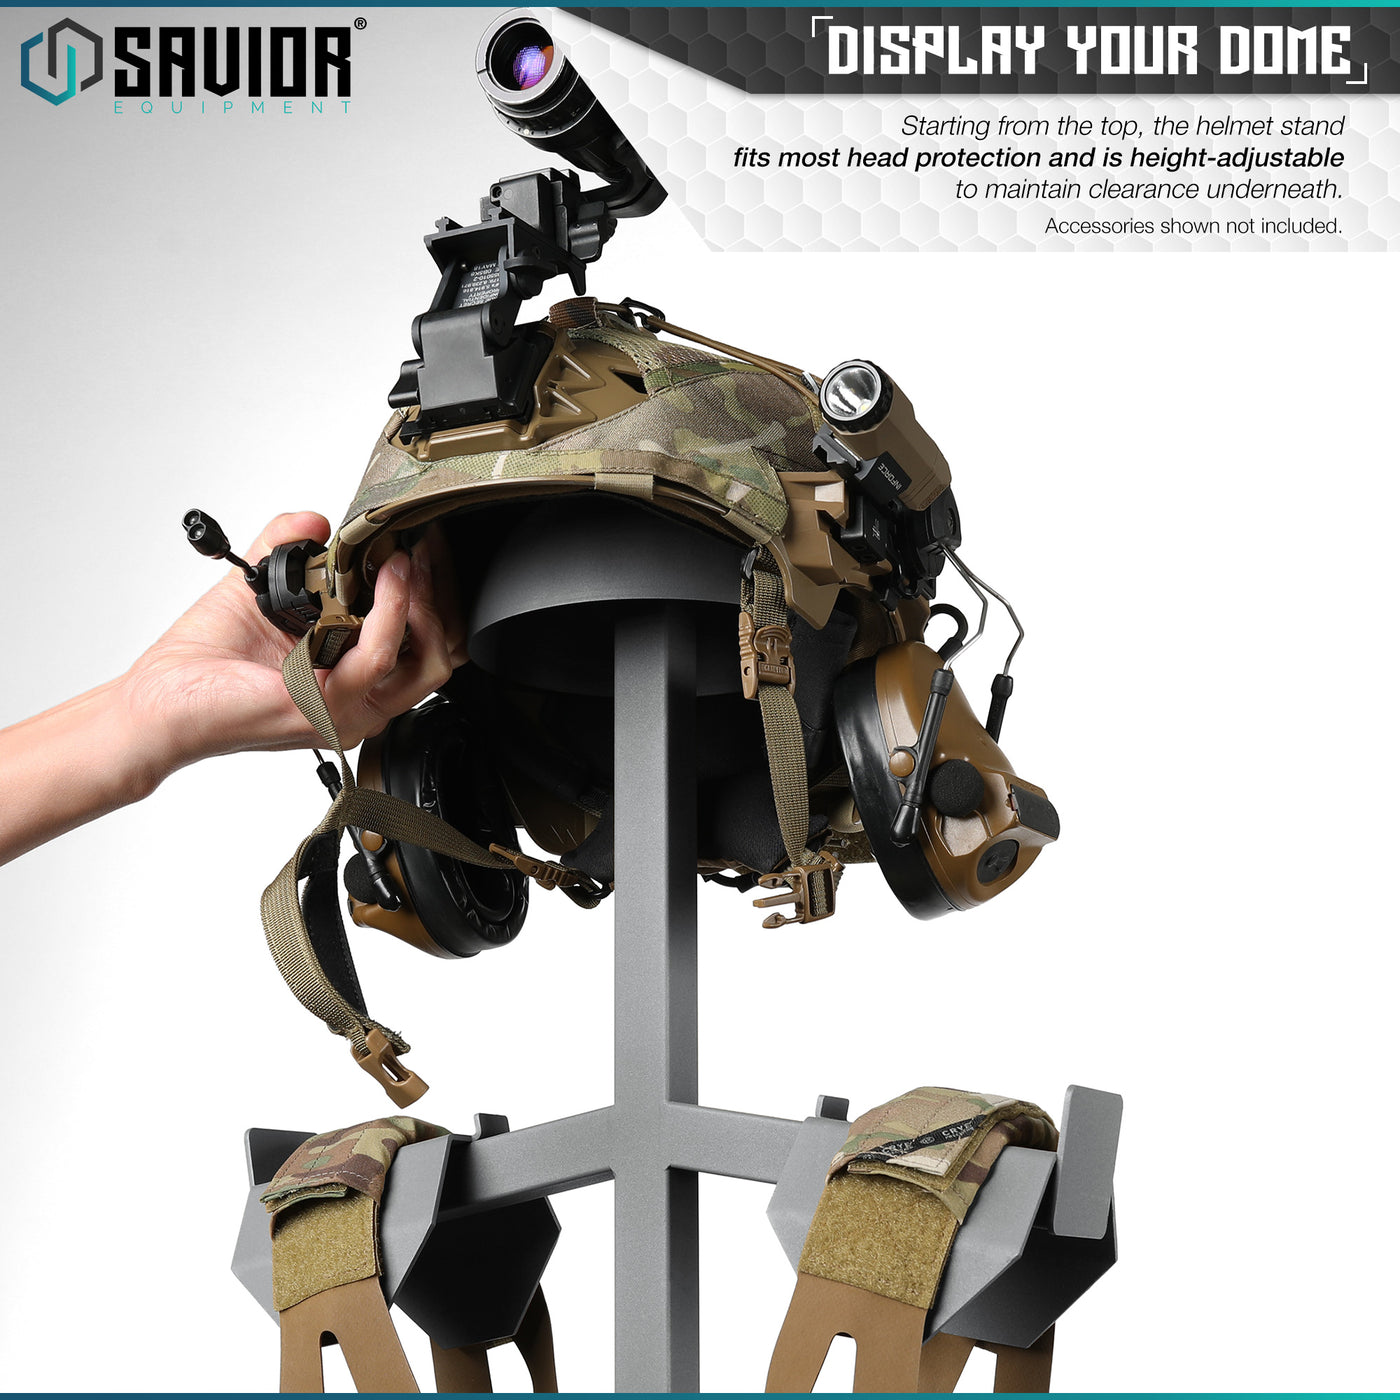 Display Your Dome - Starting from the top, the helmet stand fits most head protection and is height-adjustable to maintain clearance underneath. Accessories shown not included.